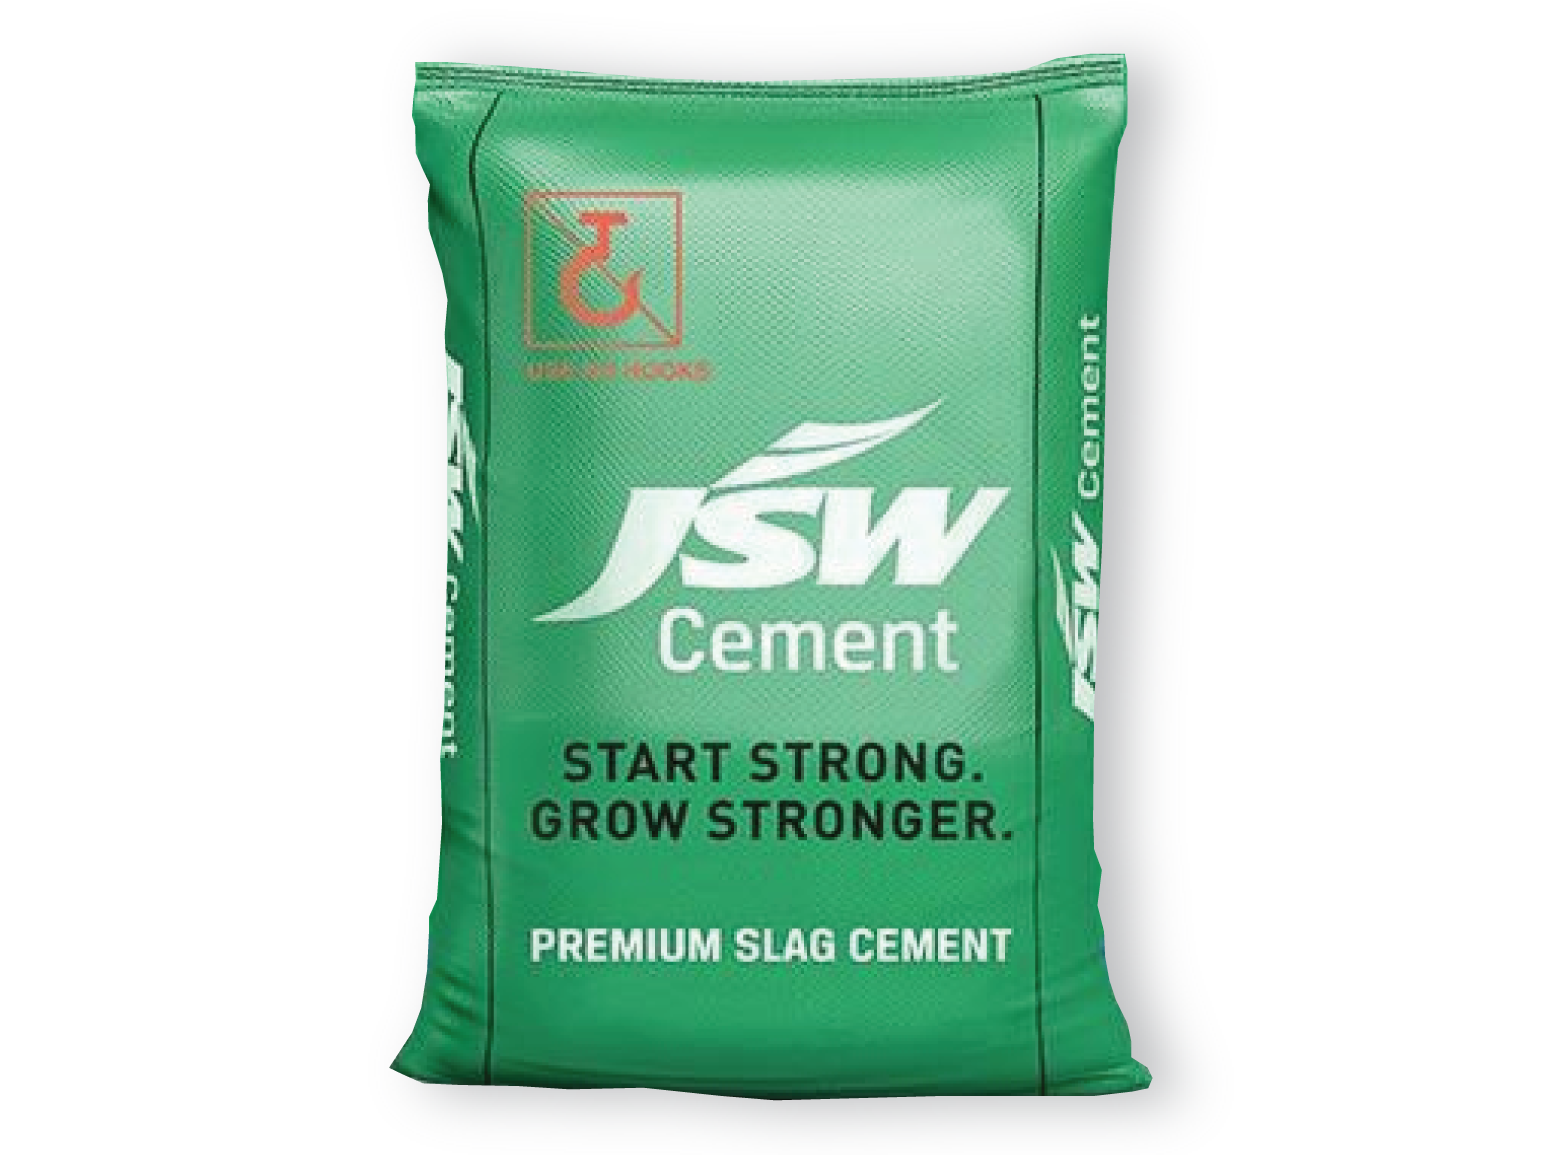 About JSW Cement - Leading Green Cement Manufacturer & Supplier